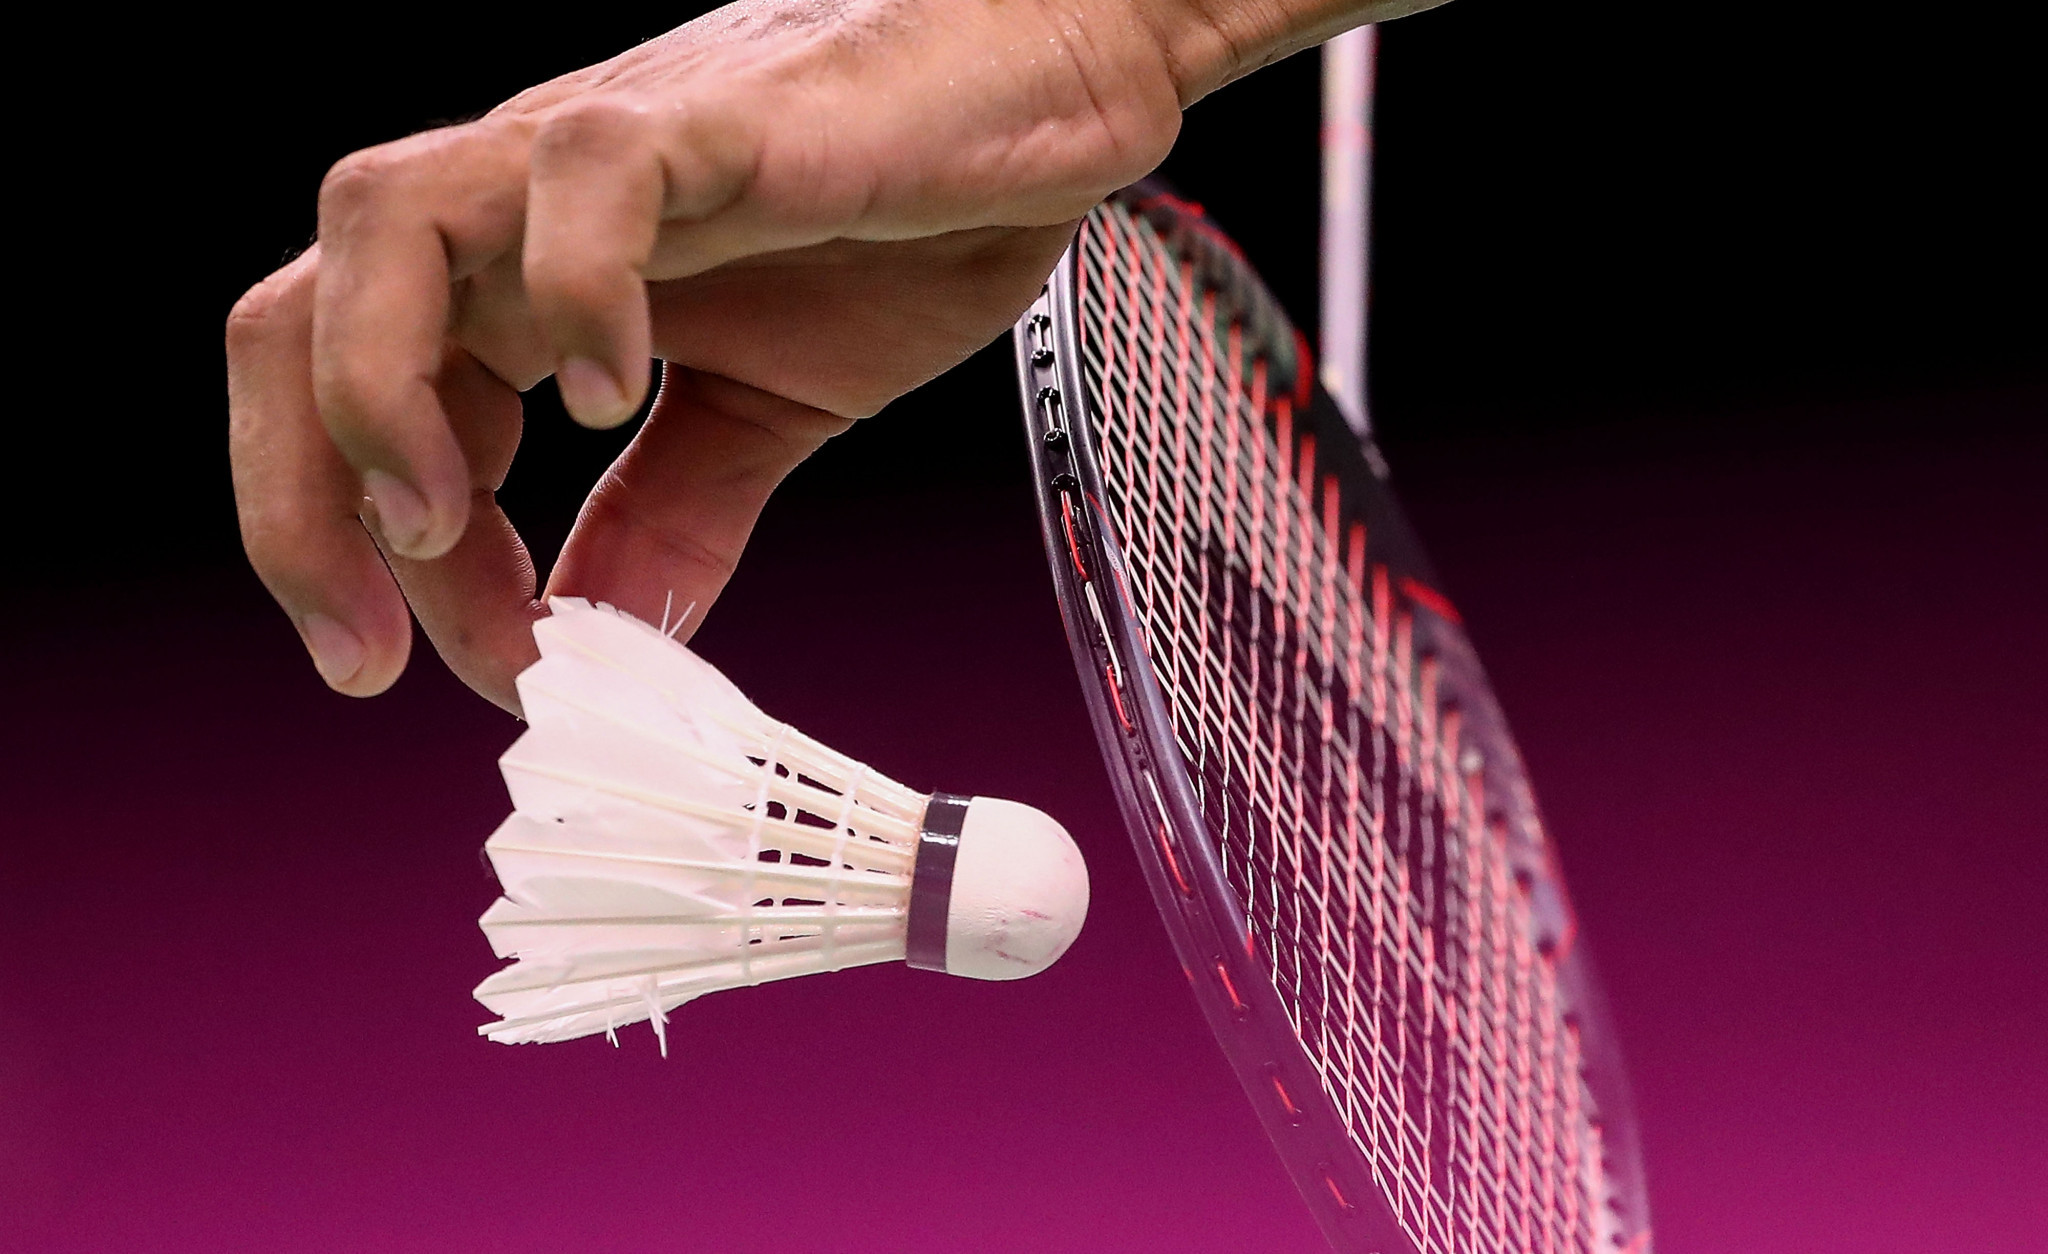  Spanish Para Badminton International offers last qualifying chance for sport’s Paralympic debut in Tokyo